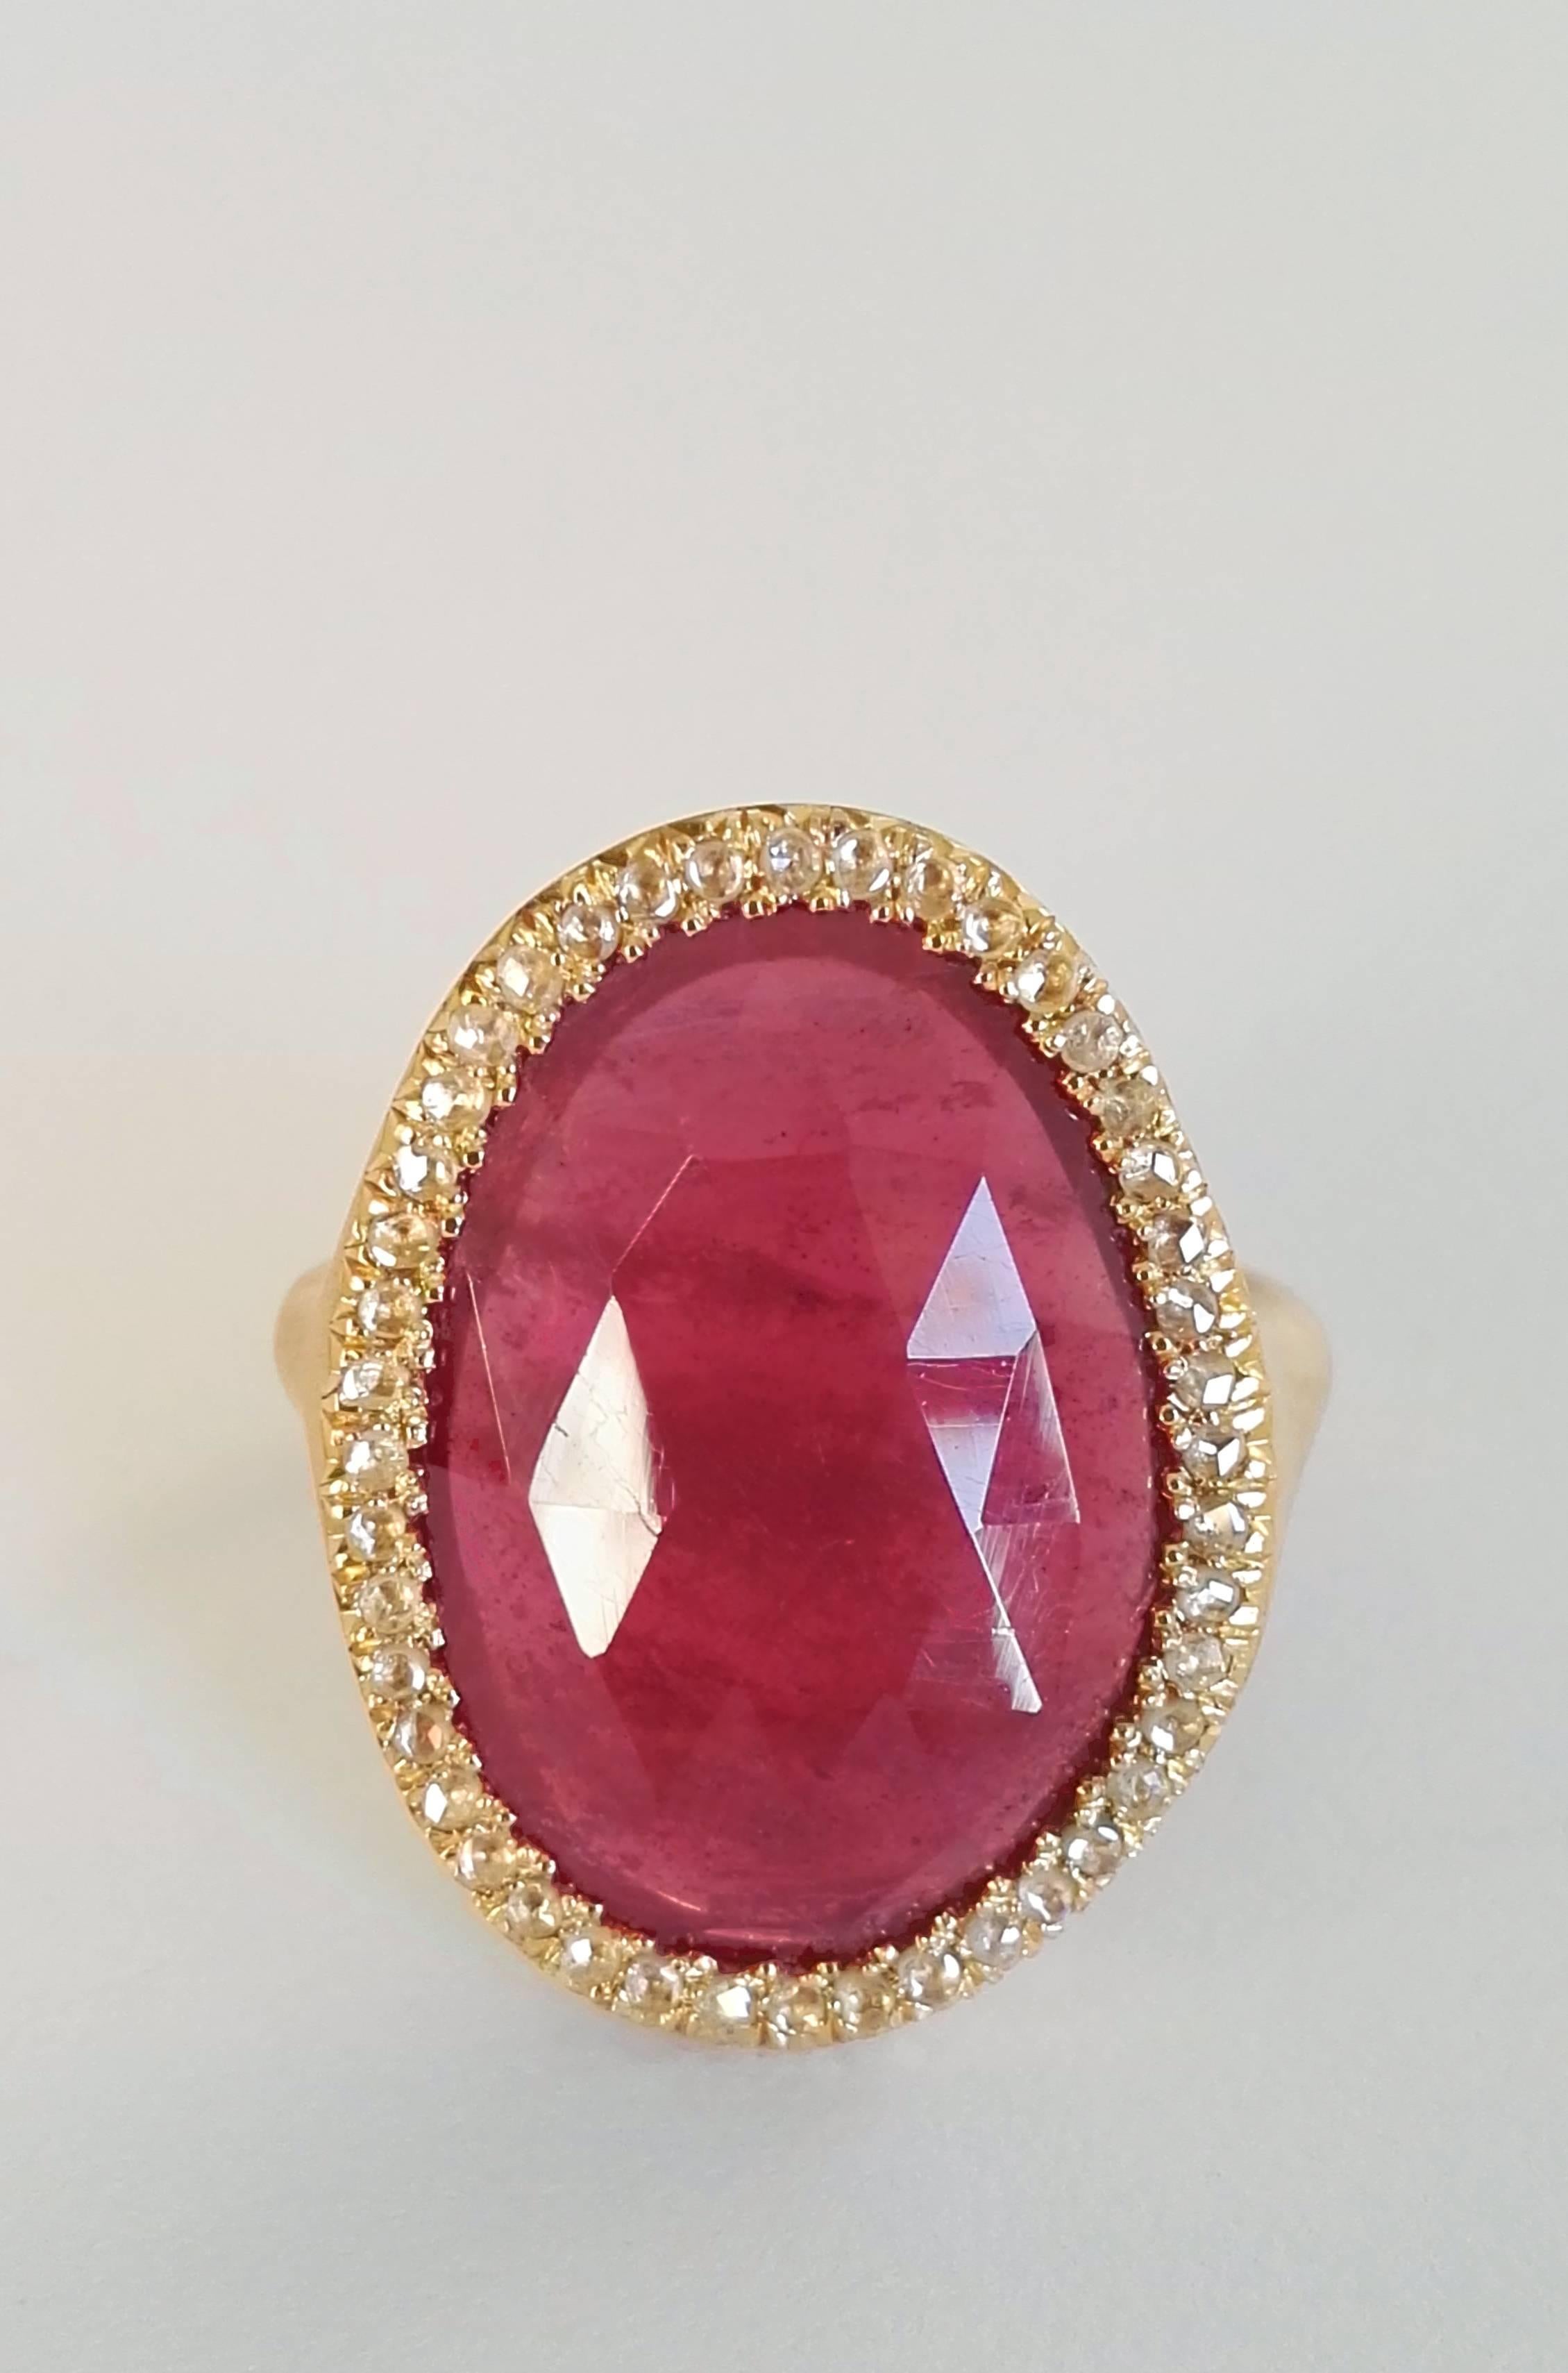 Dalben design one of a kind 18k yellow gold satin finishing ring with a 11,08 carat bezel-set faceted treated red sapphire  surrounded by 0,32 carat rose cut diamonds. .
Bezel stone dimensions : width 0,72 inch (18,40 mm) height 0,92 inch (23,50